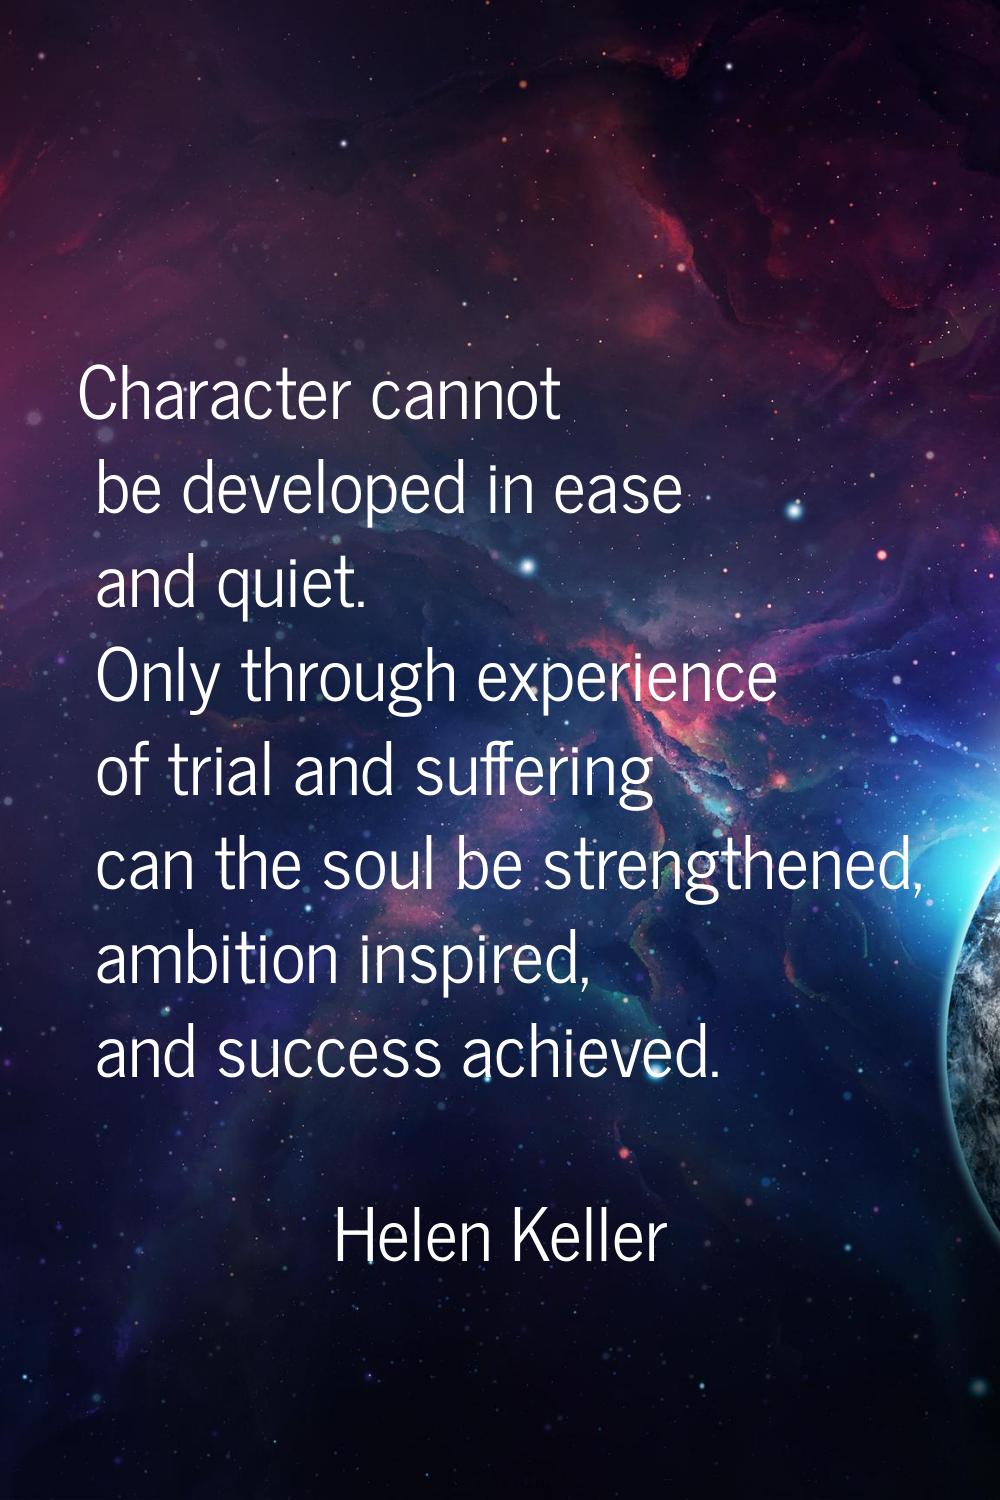 Character cannot be developed in ease and quiet. Only through experience of trial and suffering can